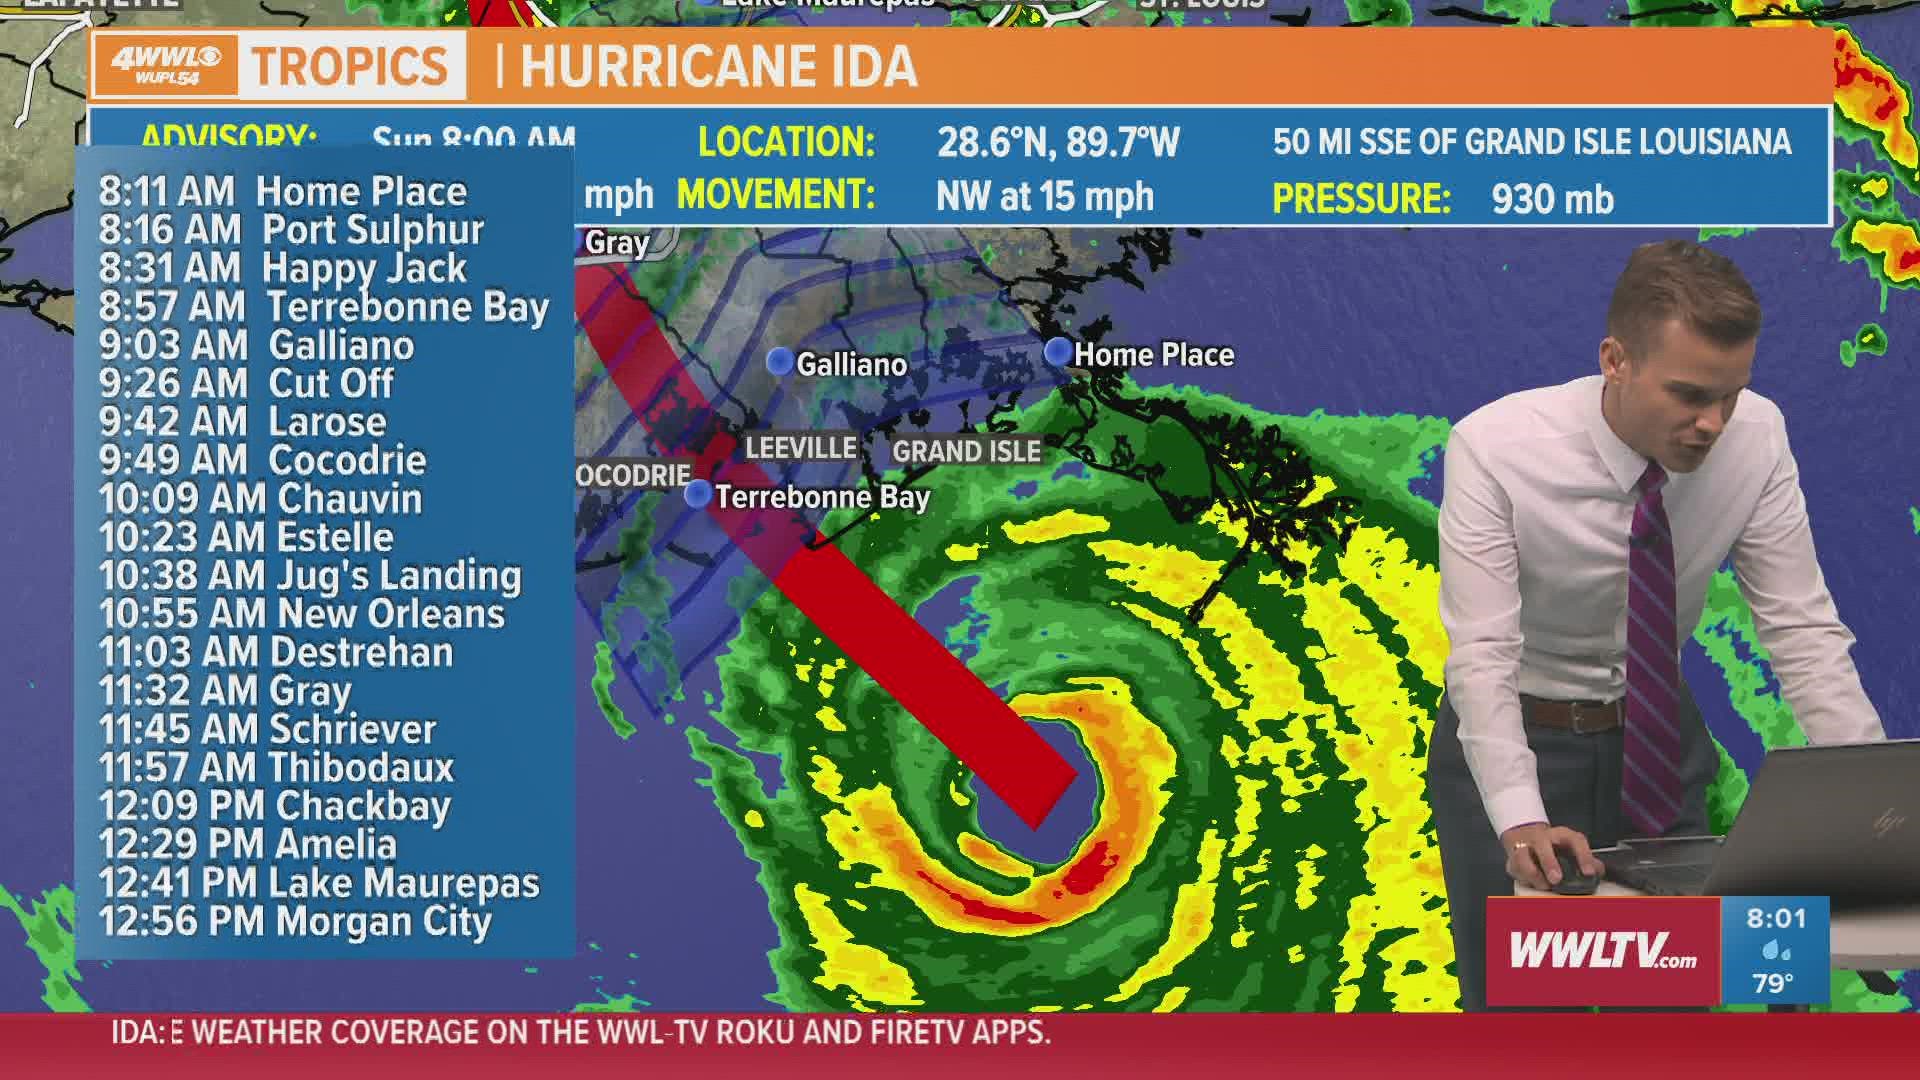 Hurricane Ida is approaching Southeast Louisiana, with sustained winds of up to 150 mph, gusts up to 185 mph.